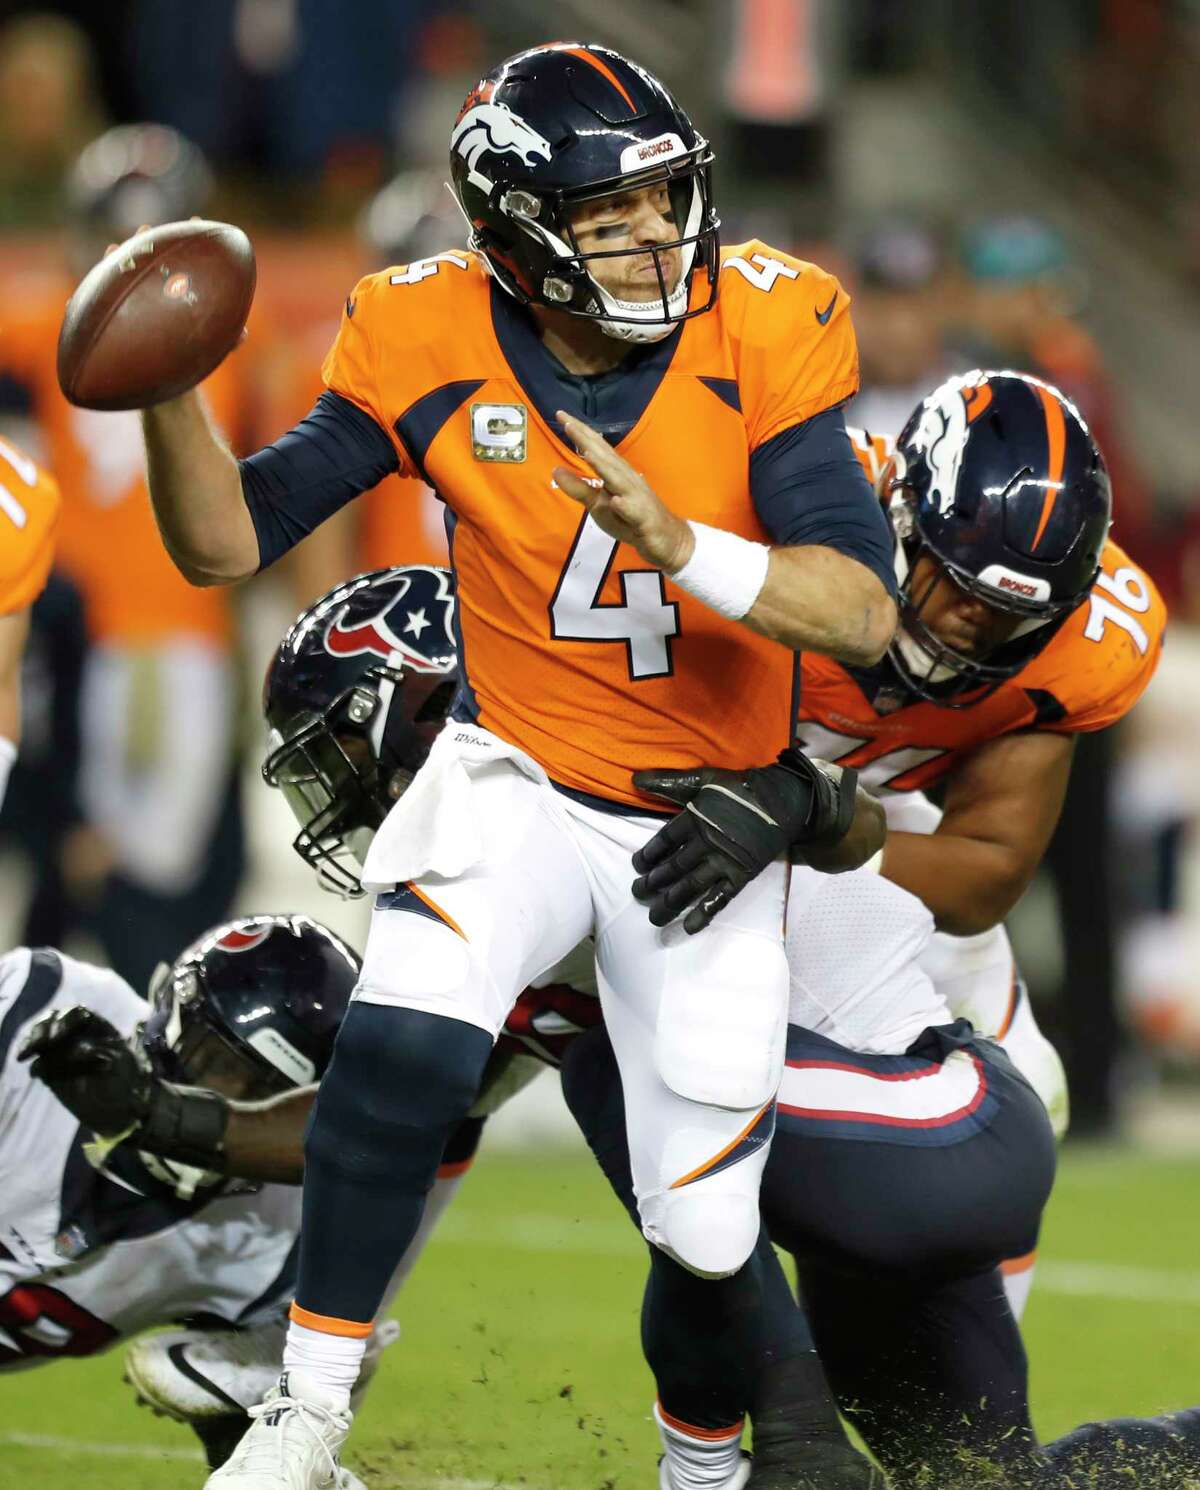 Denver Broncos quarterback Case Keenum (4) is hit by Houston Texans outside linebacker Jadeveon Clowney (90) during the fourth quarter of an NFL football game at Broncos Stadium at Mile High on Sunday, Nov. 4, 2018, in Denver.